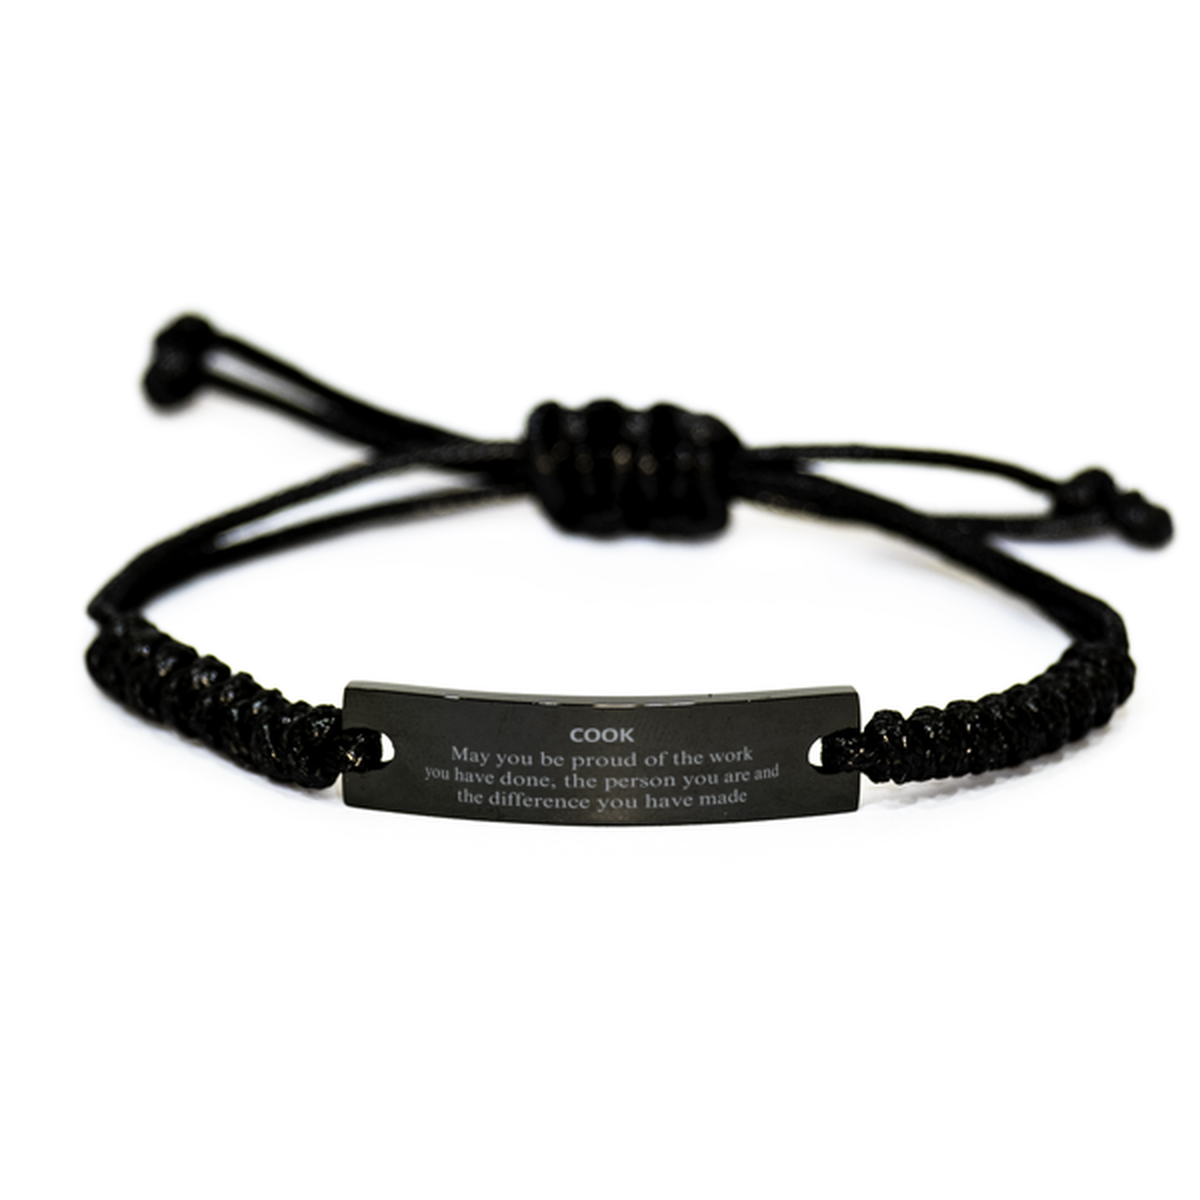 Cook May you be proud of the work you have done, Retirement Cook Black Rope Bracelet for Colleague Appreciation Gifts Amazing for Cook